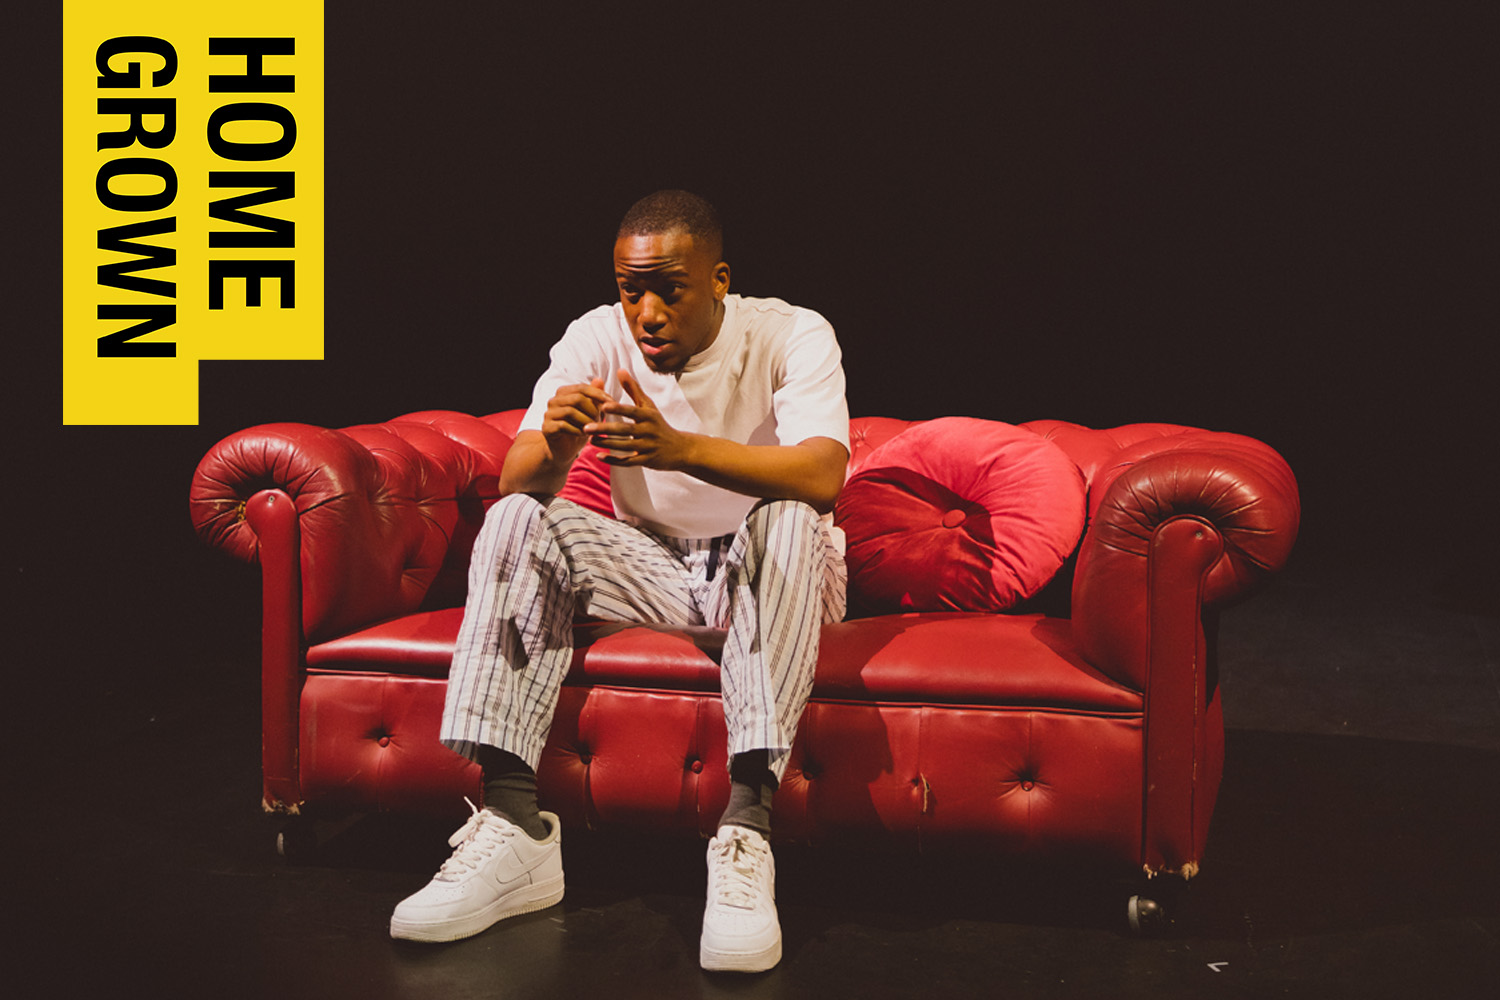 Lakeside Theatre Homegown. A young black man in a light coloured tee-shirt and trousers sits on a red leather couch on a dark stage.